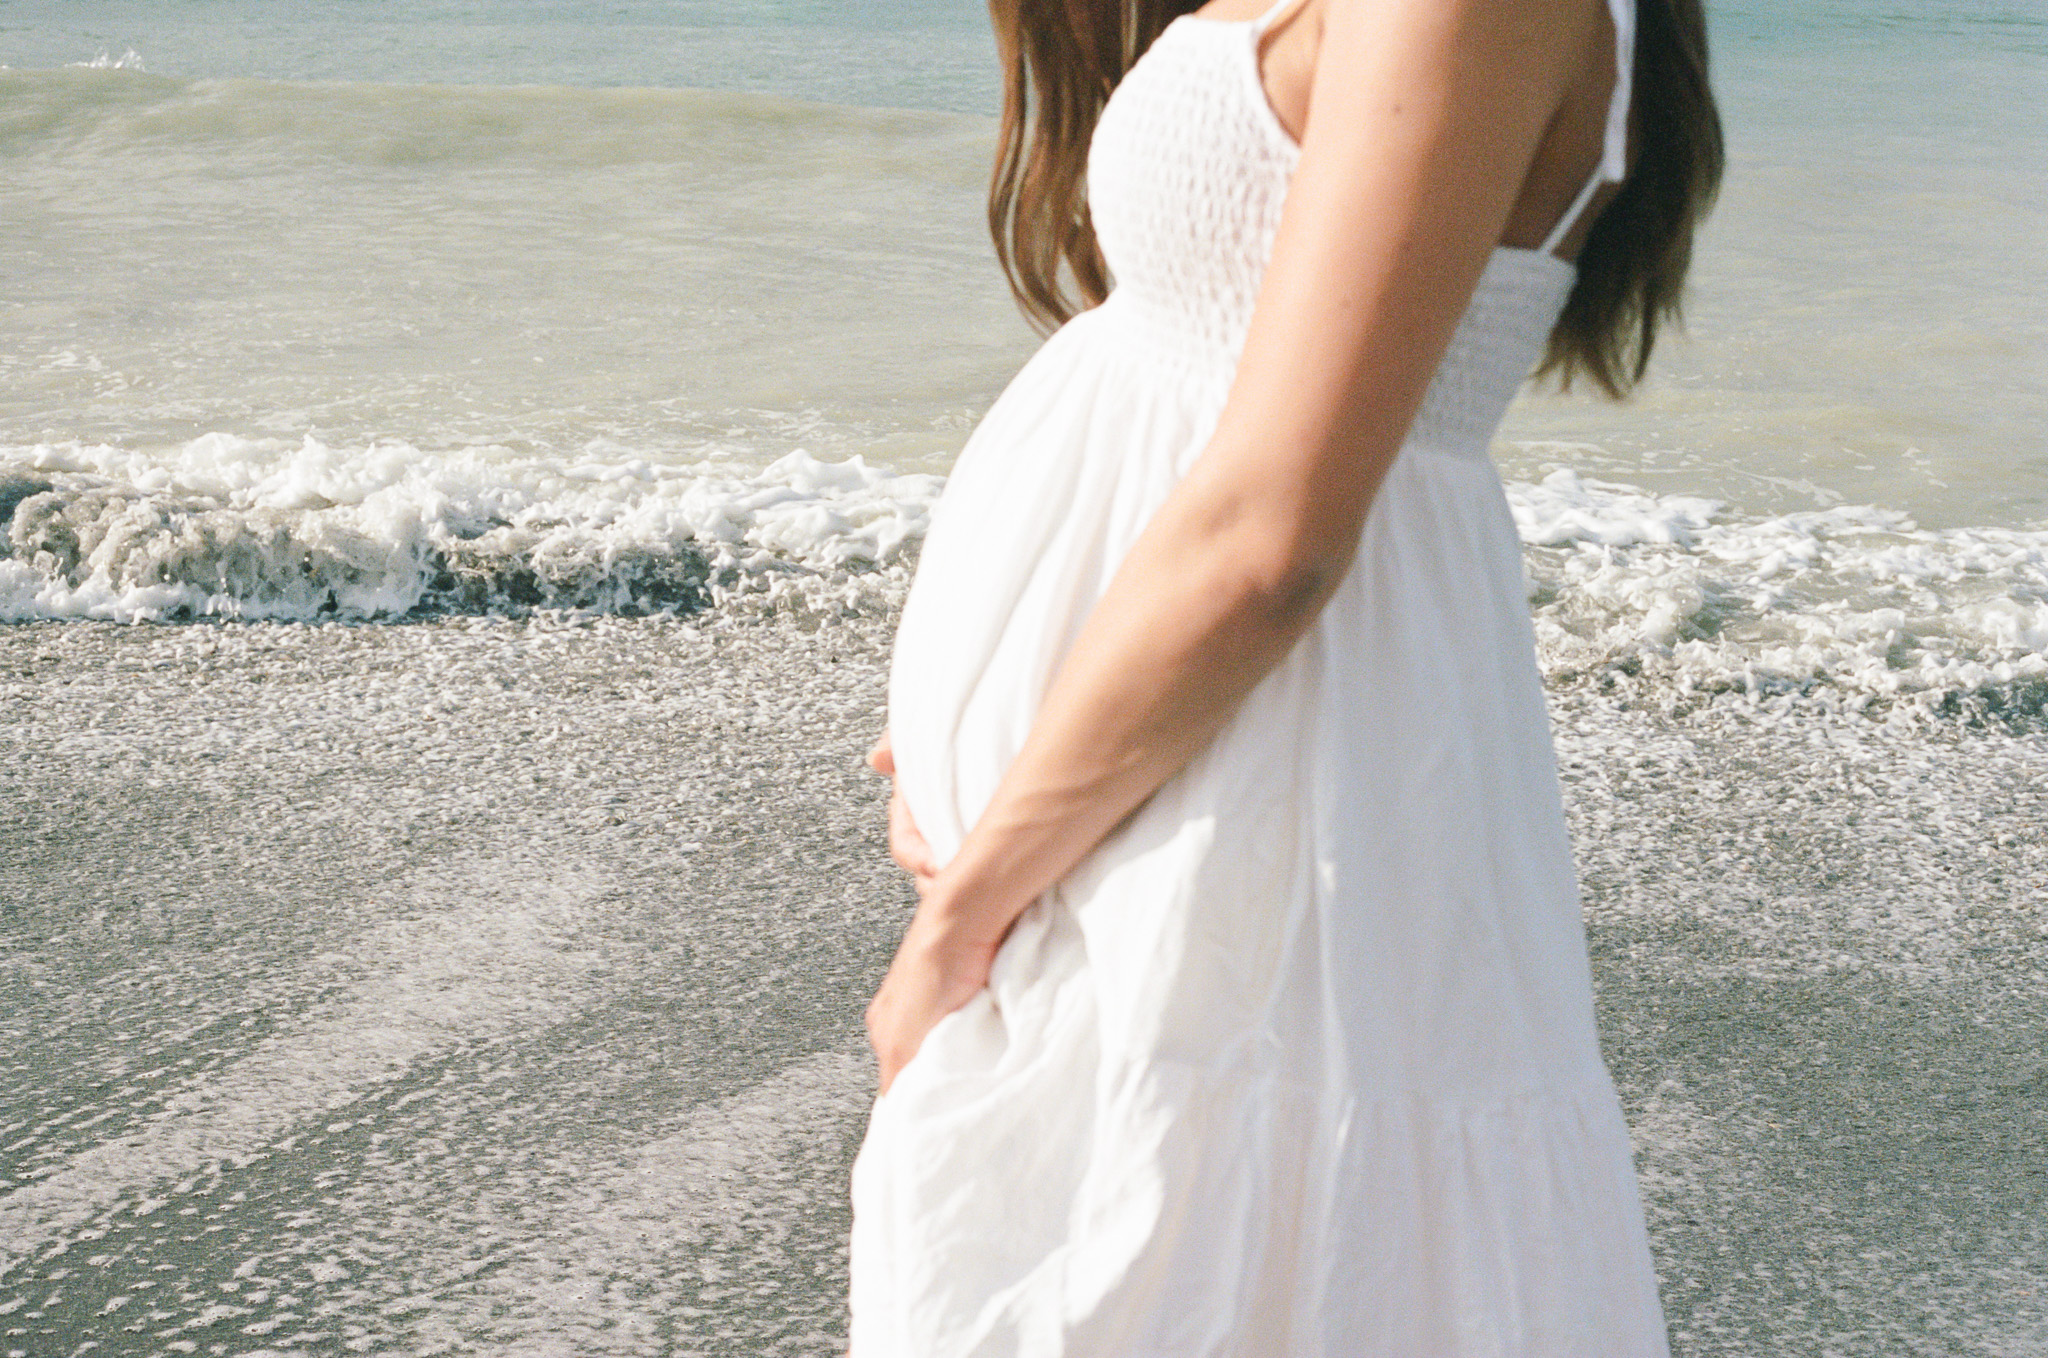 Sunrise maternity photos on the beach with mom in white dress by Maternity Photographer in Charleston, SC